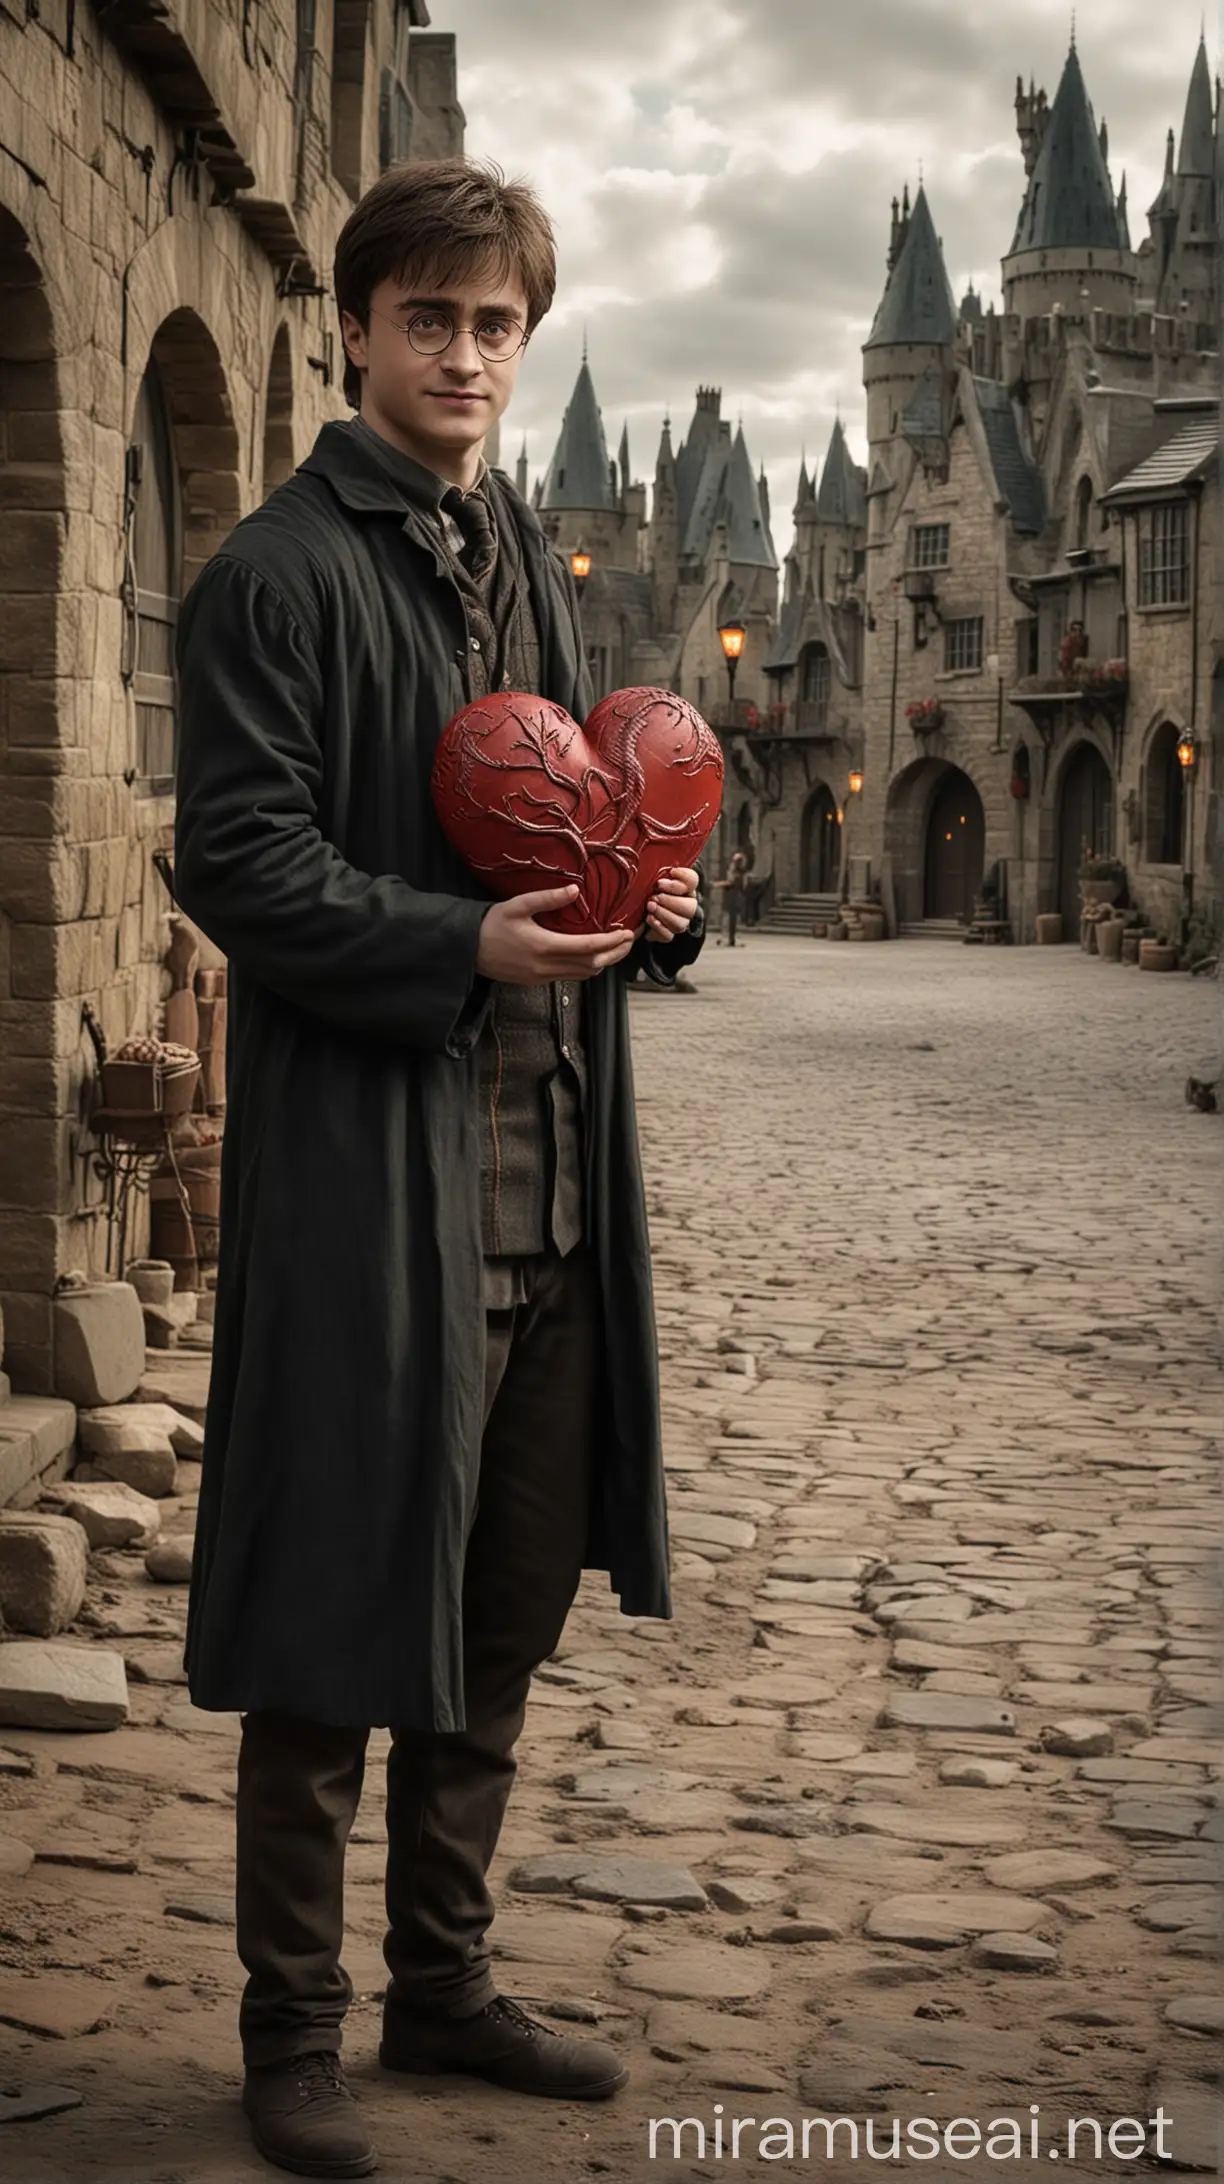 harry potter holding a heart against the backdrop of a Game of Thrones location with elements of House of the Dragon